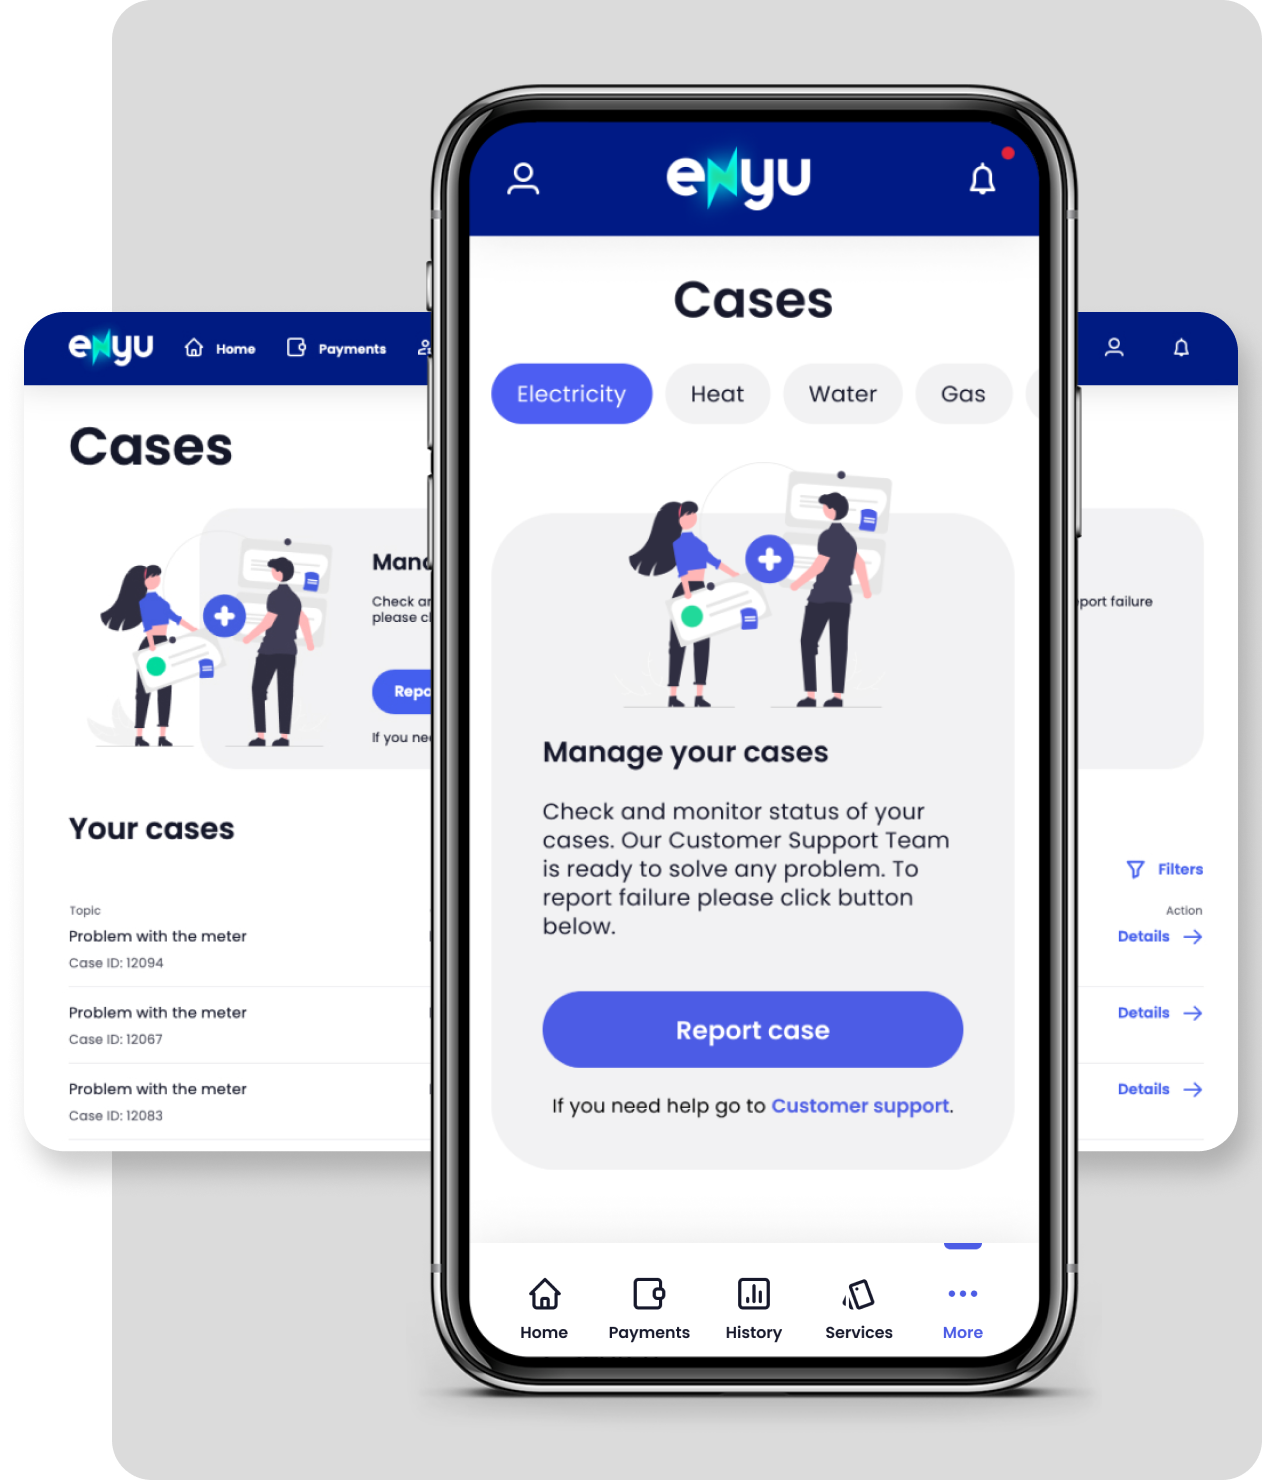 Enyu self-care mobile app screens show screens of reporting cases to the customer service team.